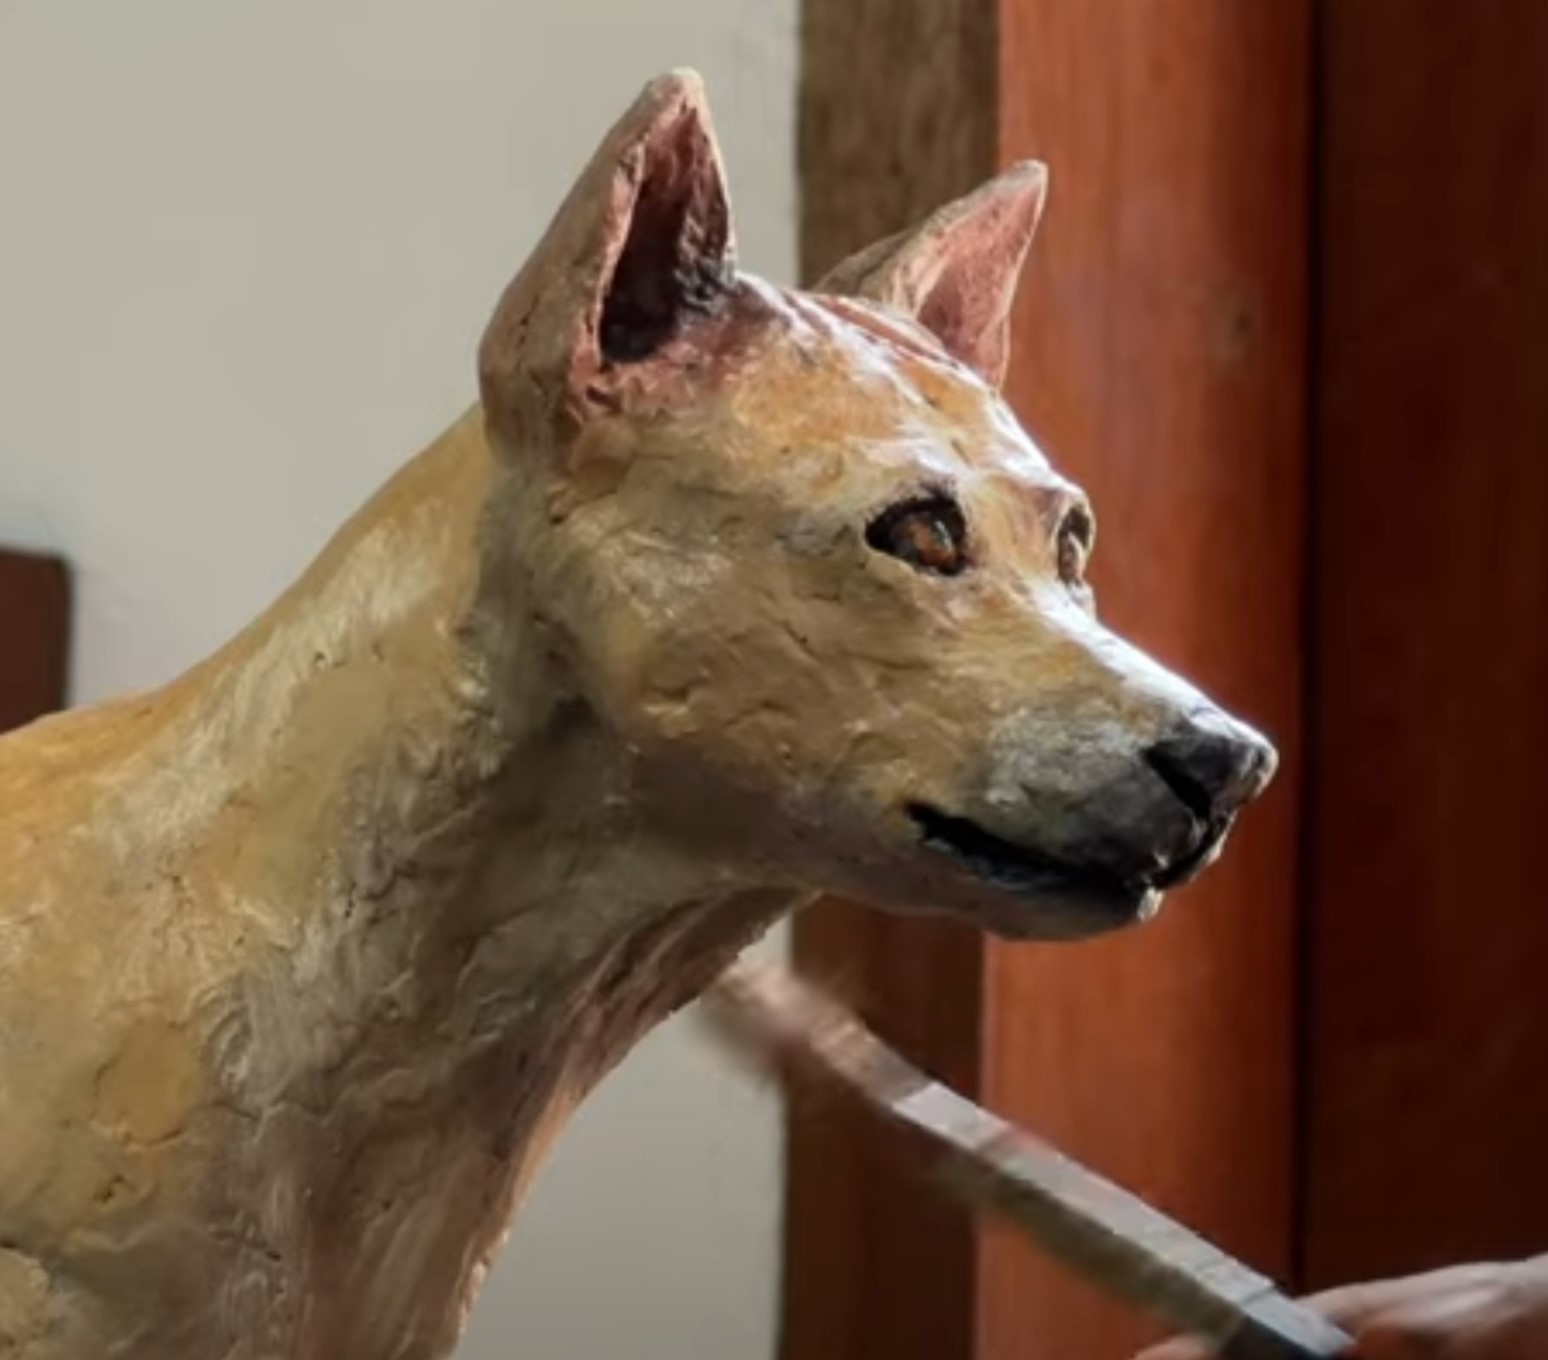 Featured image from Art: Making a Sculpture of a Dog by Khwan